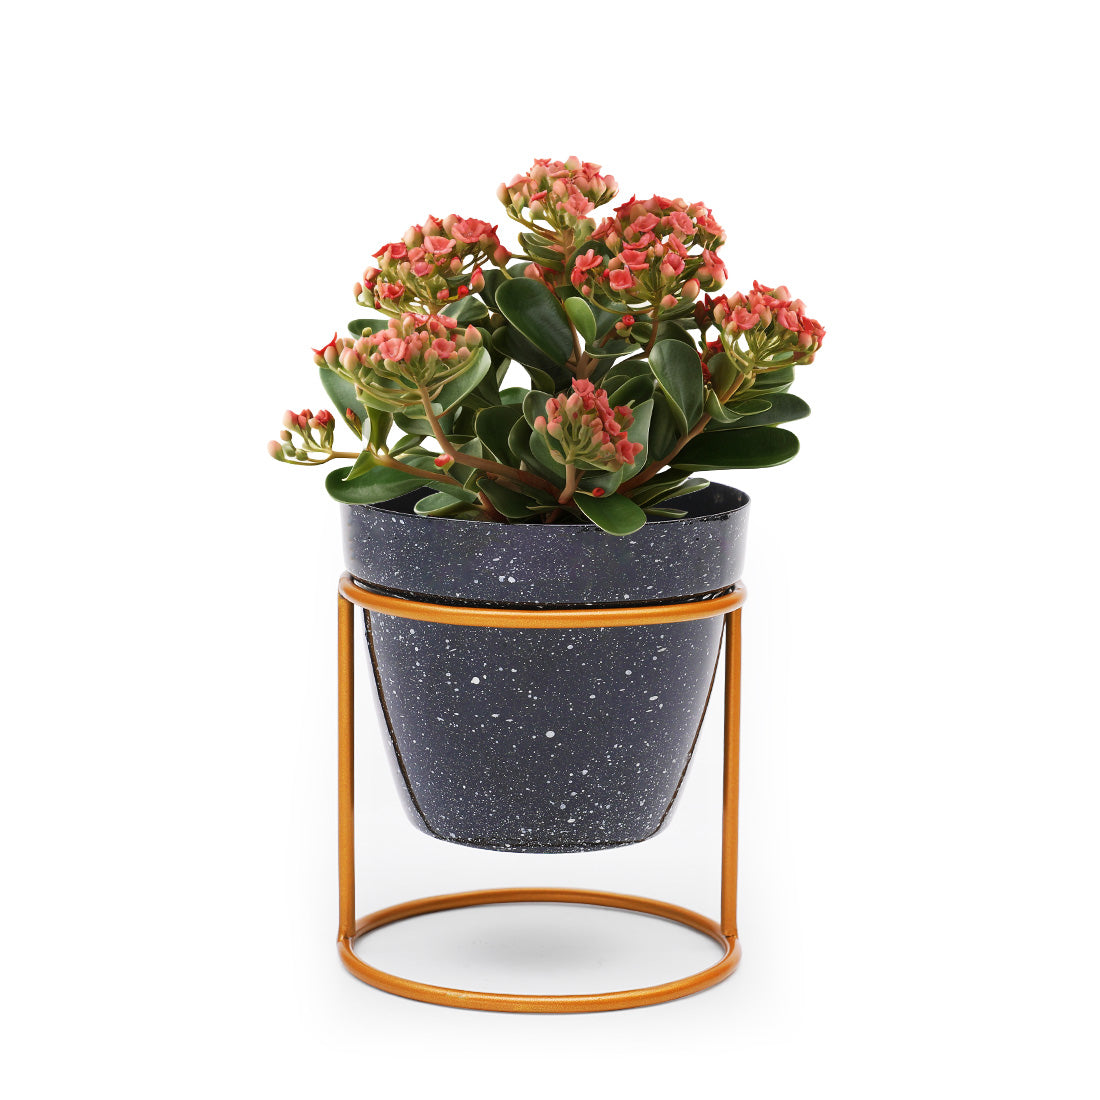 Dekornest Small Pot with Stand (1501)